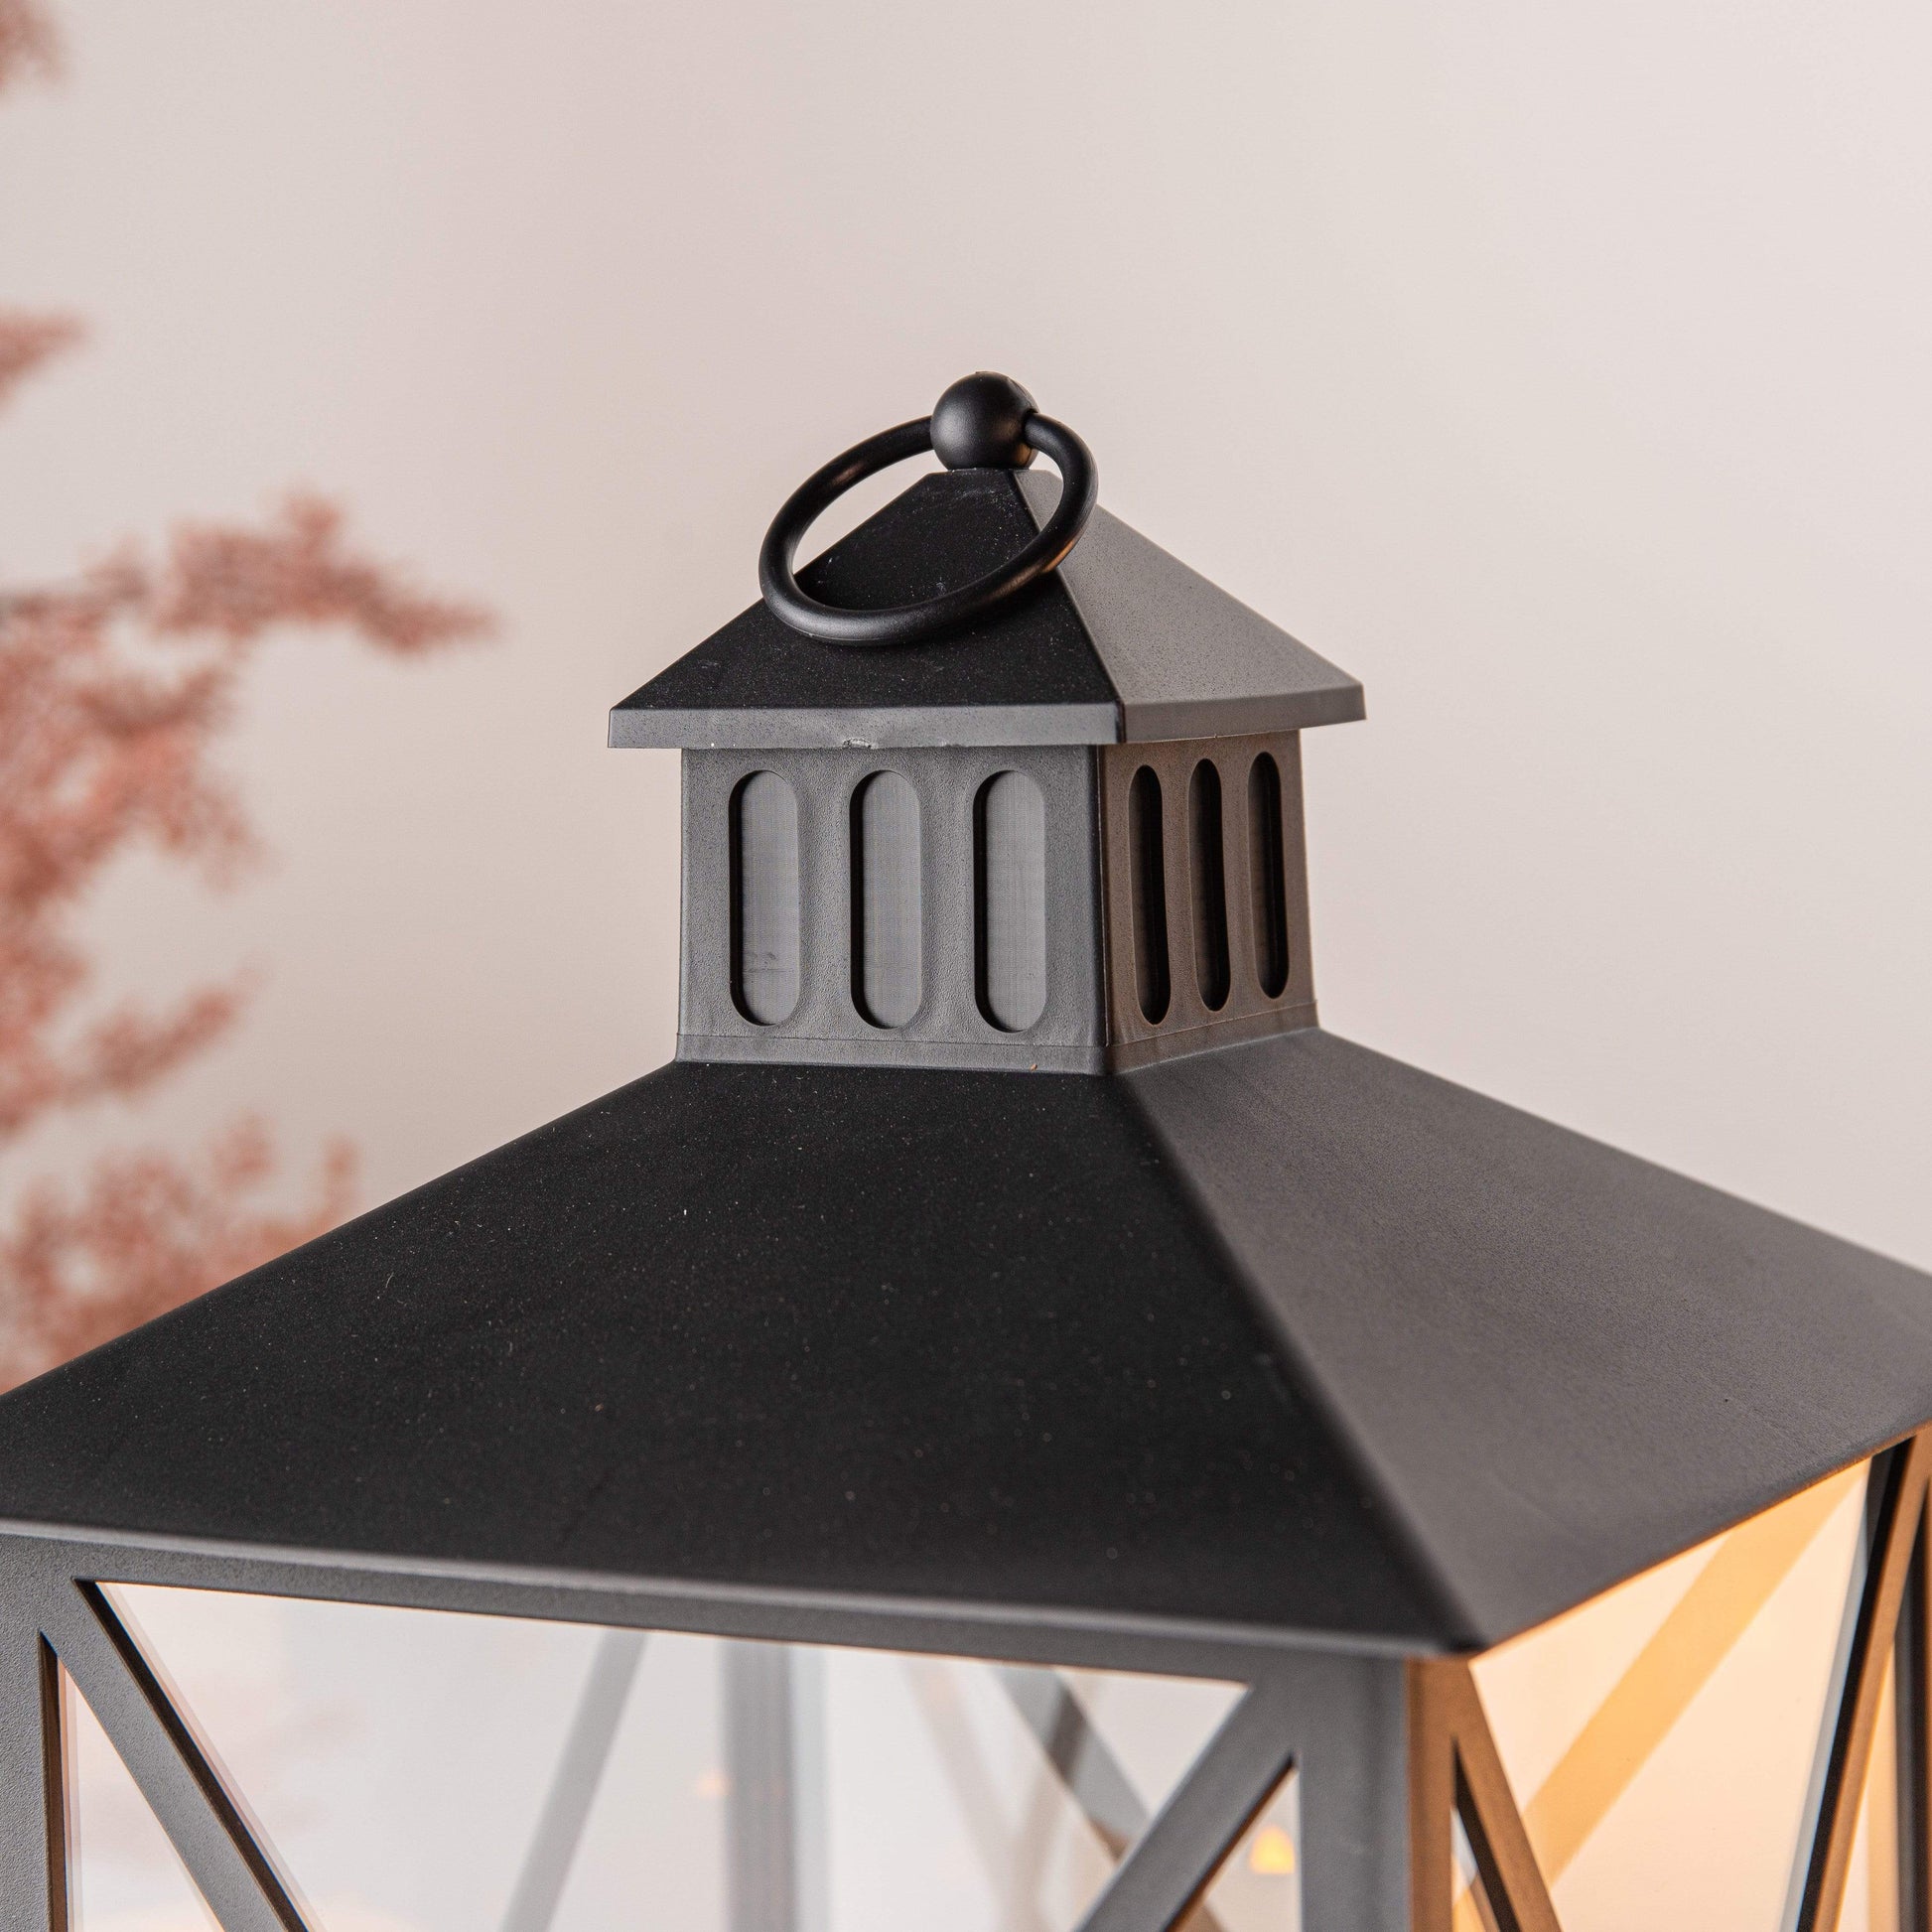 Christmas  -  Flick-A-Bright Black Candle Lantern with Timer - 40cm  -  60001074